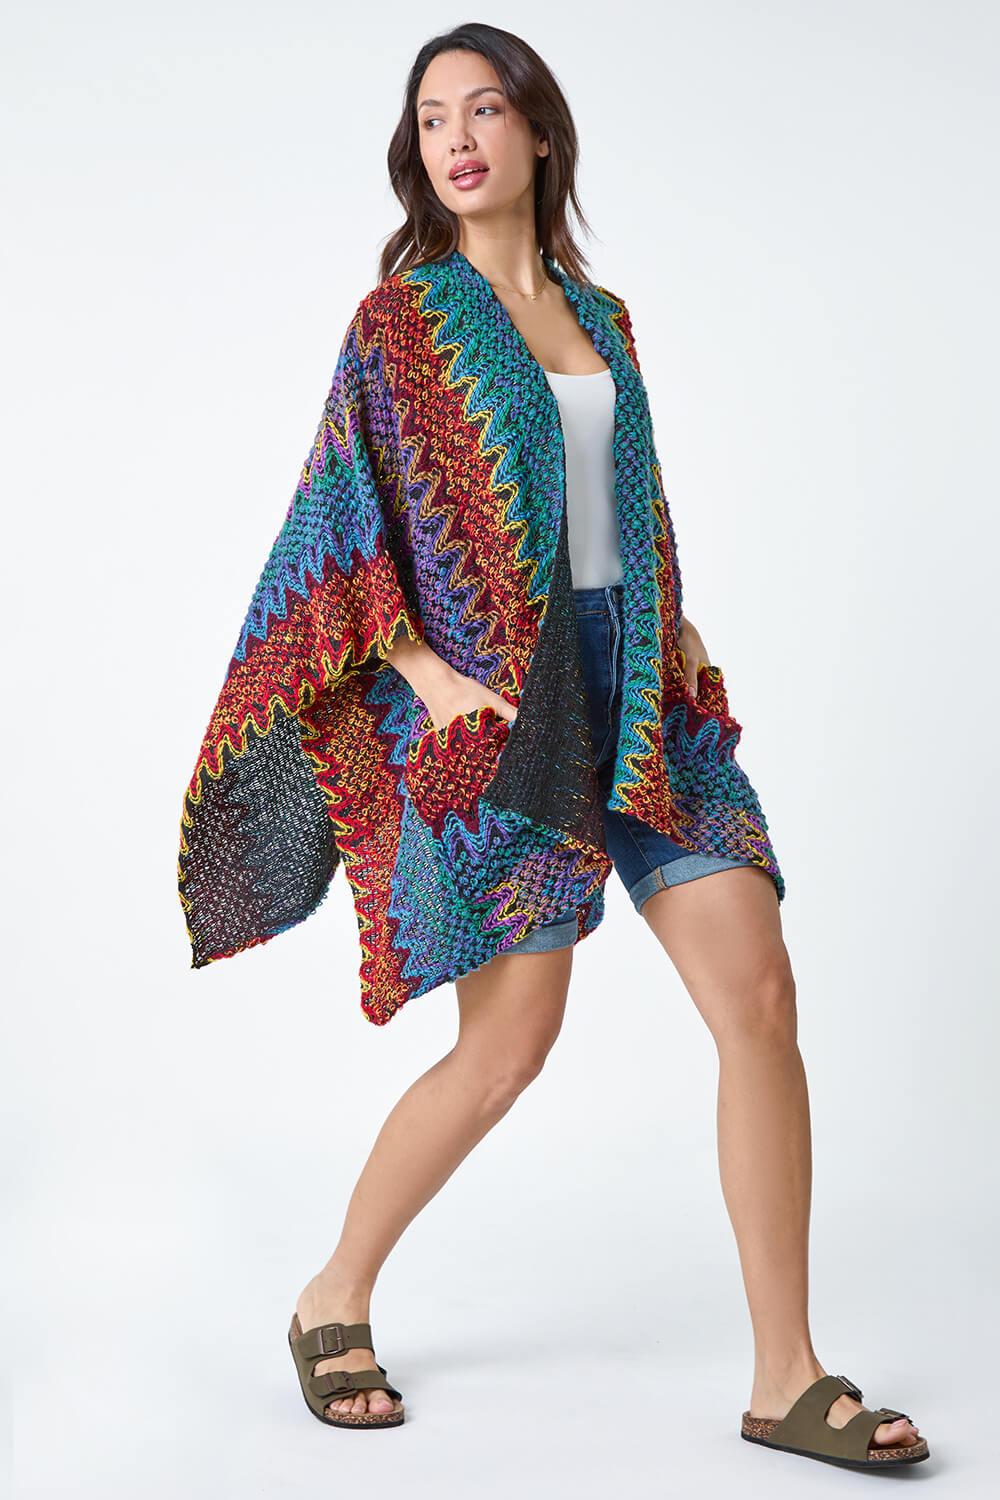 Turquoise One Size Textured Aztec Print Cape, Image 2 of 5